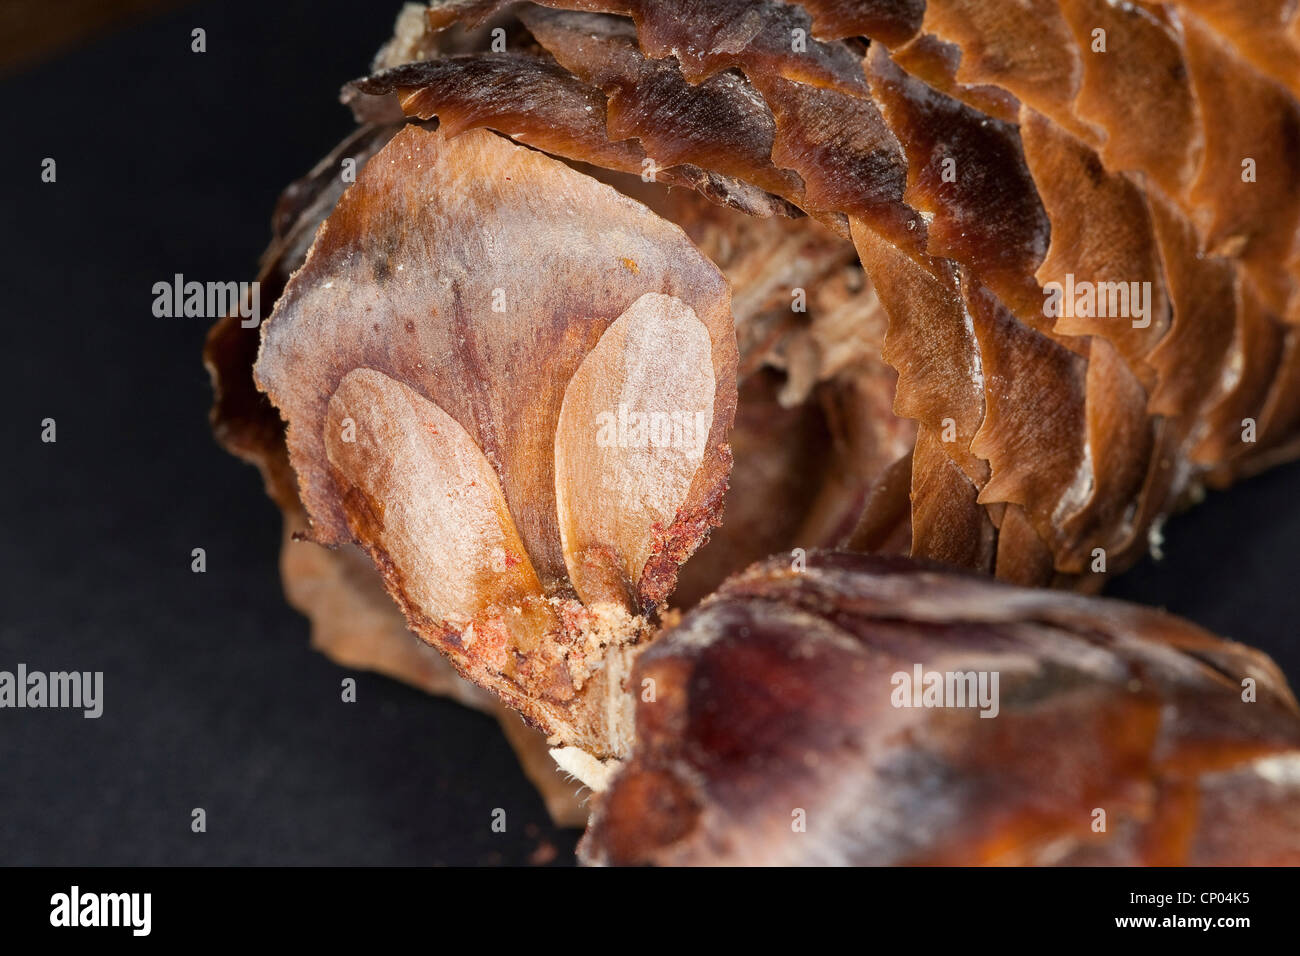 Norway spruce (Picea abies), seeds of a spruce on a cone scale, Germany Stock Photo